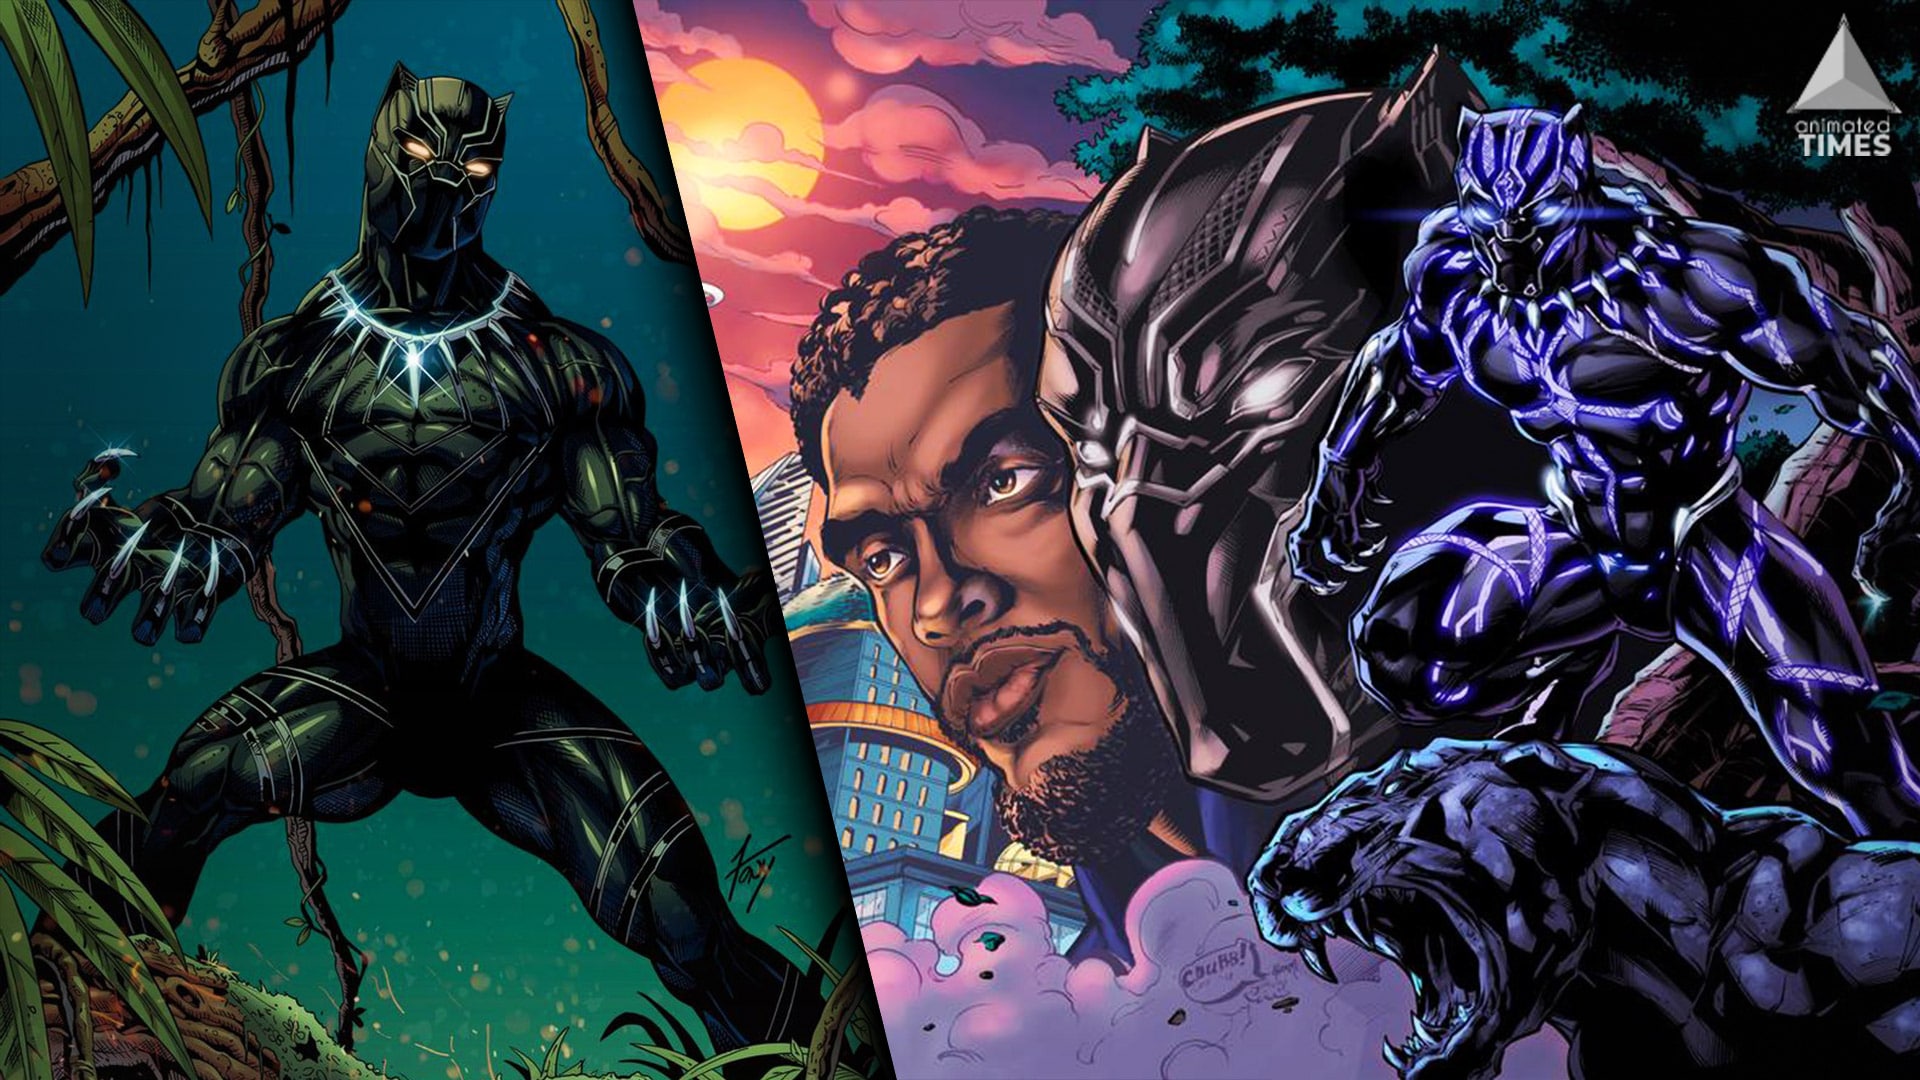 10 Black Panther Fan Arts Better Than The MCU Version - Animated Times